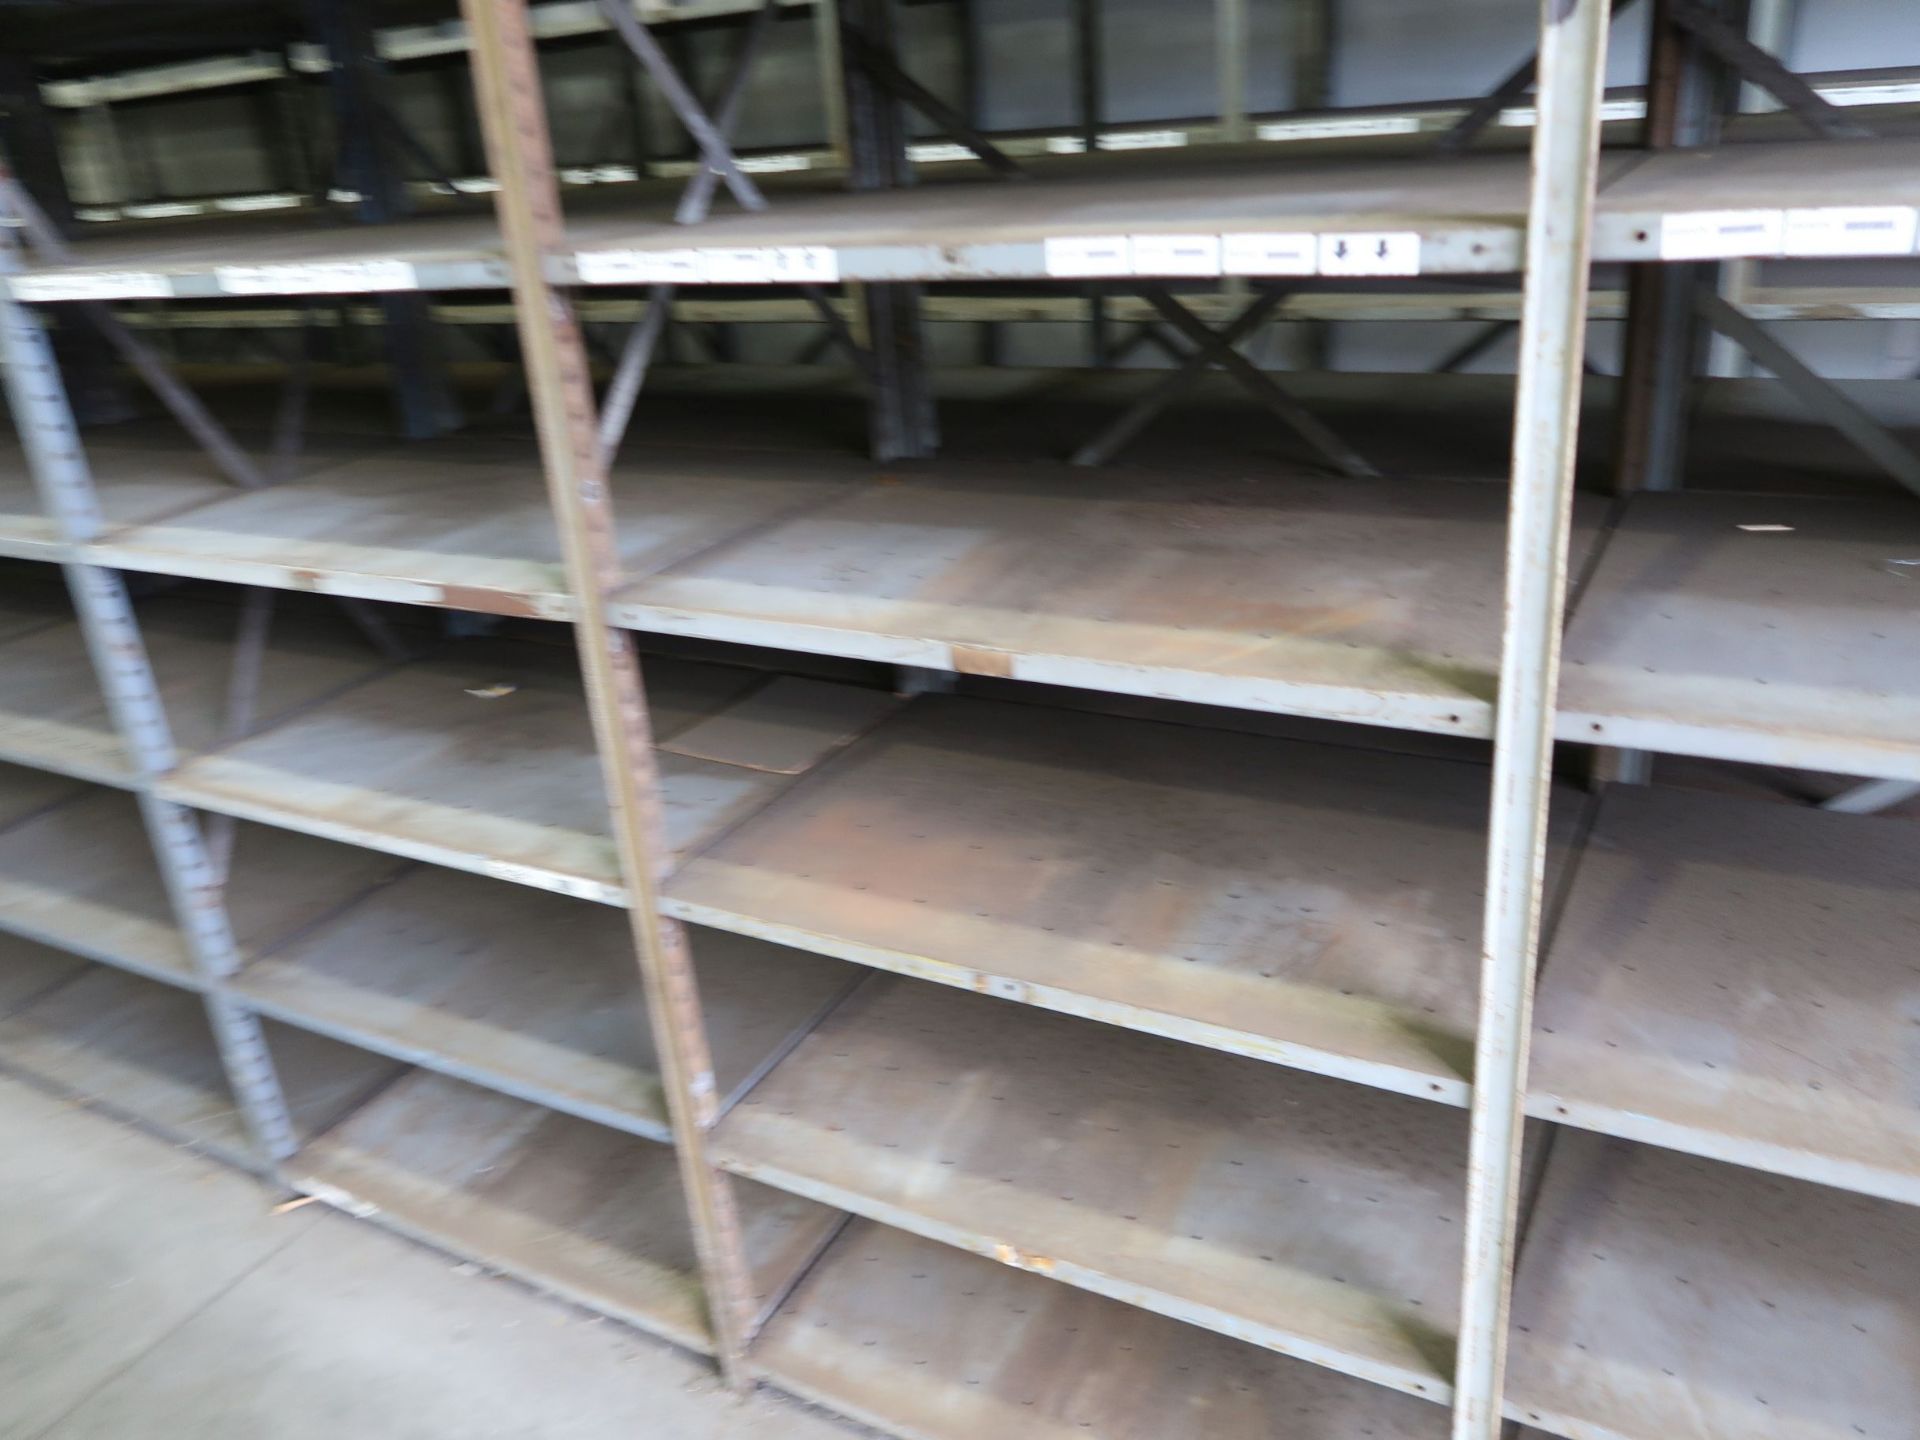 SECTIONS 24" X 36" X 85" STEEL SHELVES, (7) SHELVES PER SECTION - Image 2 of 2